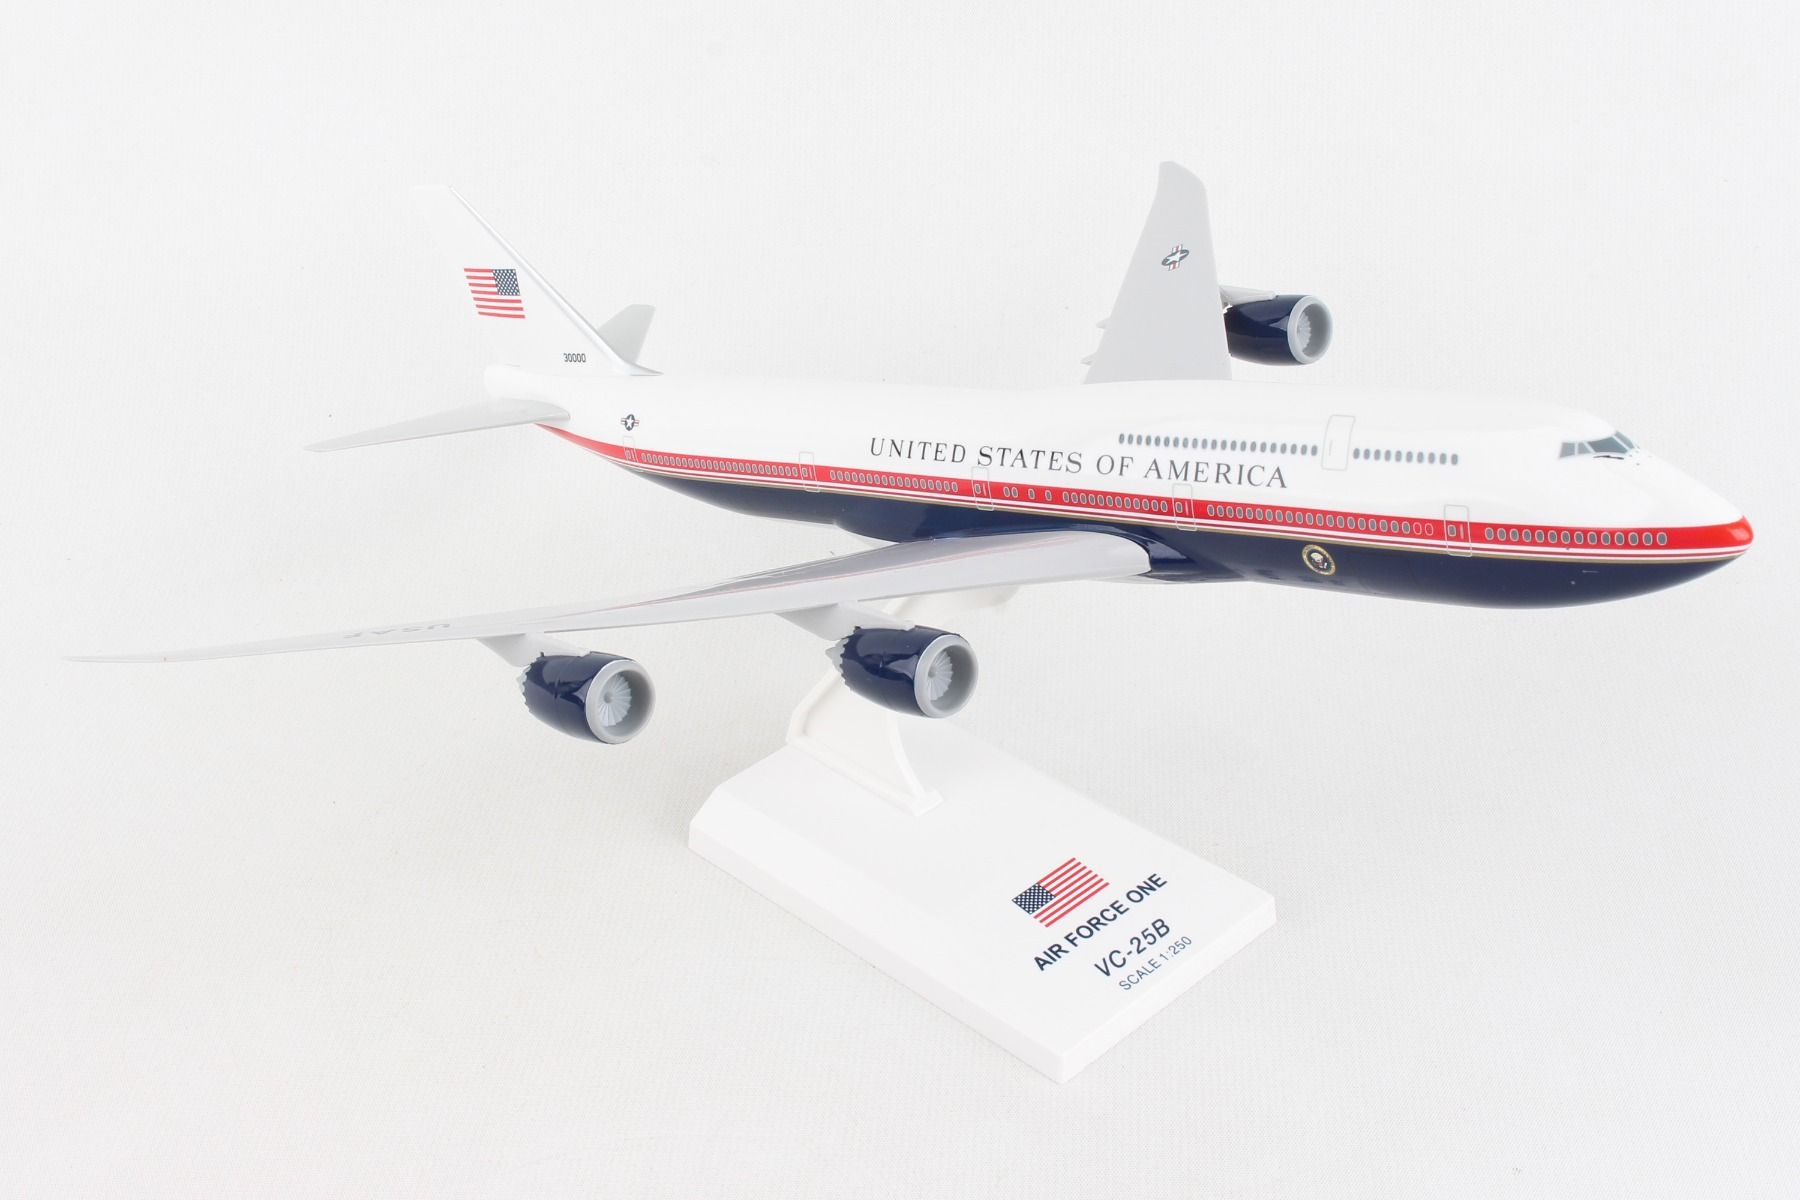 SKYMARKS AIR FORCE ONE 747-8 1/250 (VC25B) #30000